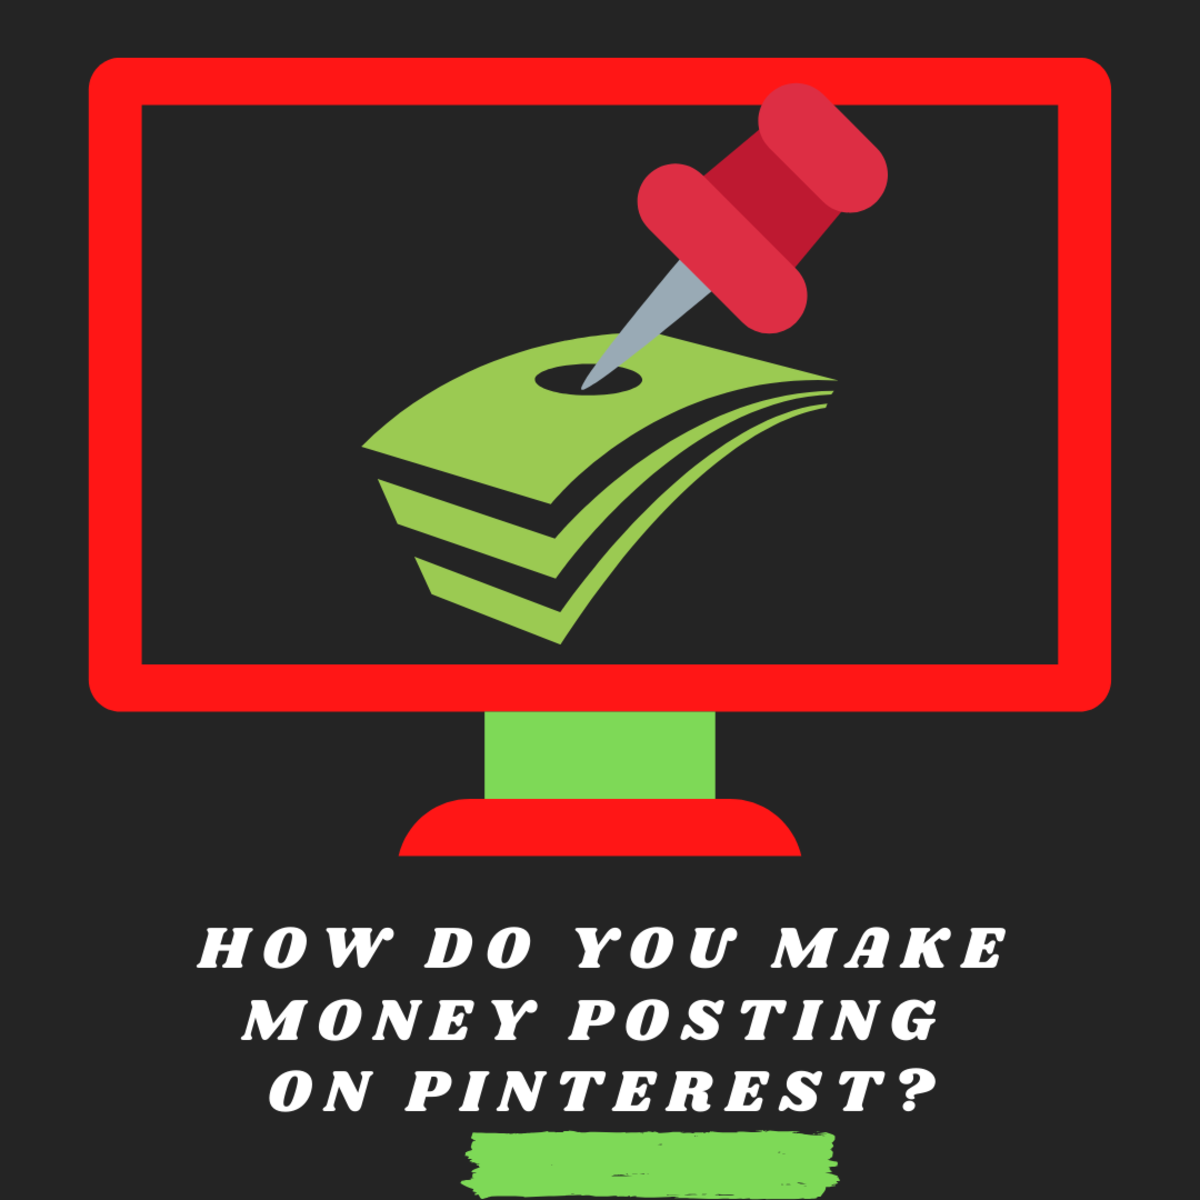 Making money on Pinterest is a great way to make if you need some extra cash. 